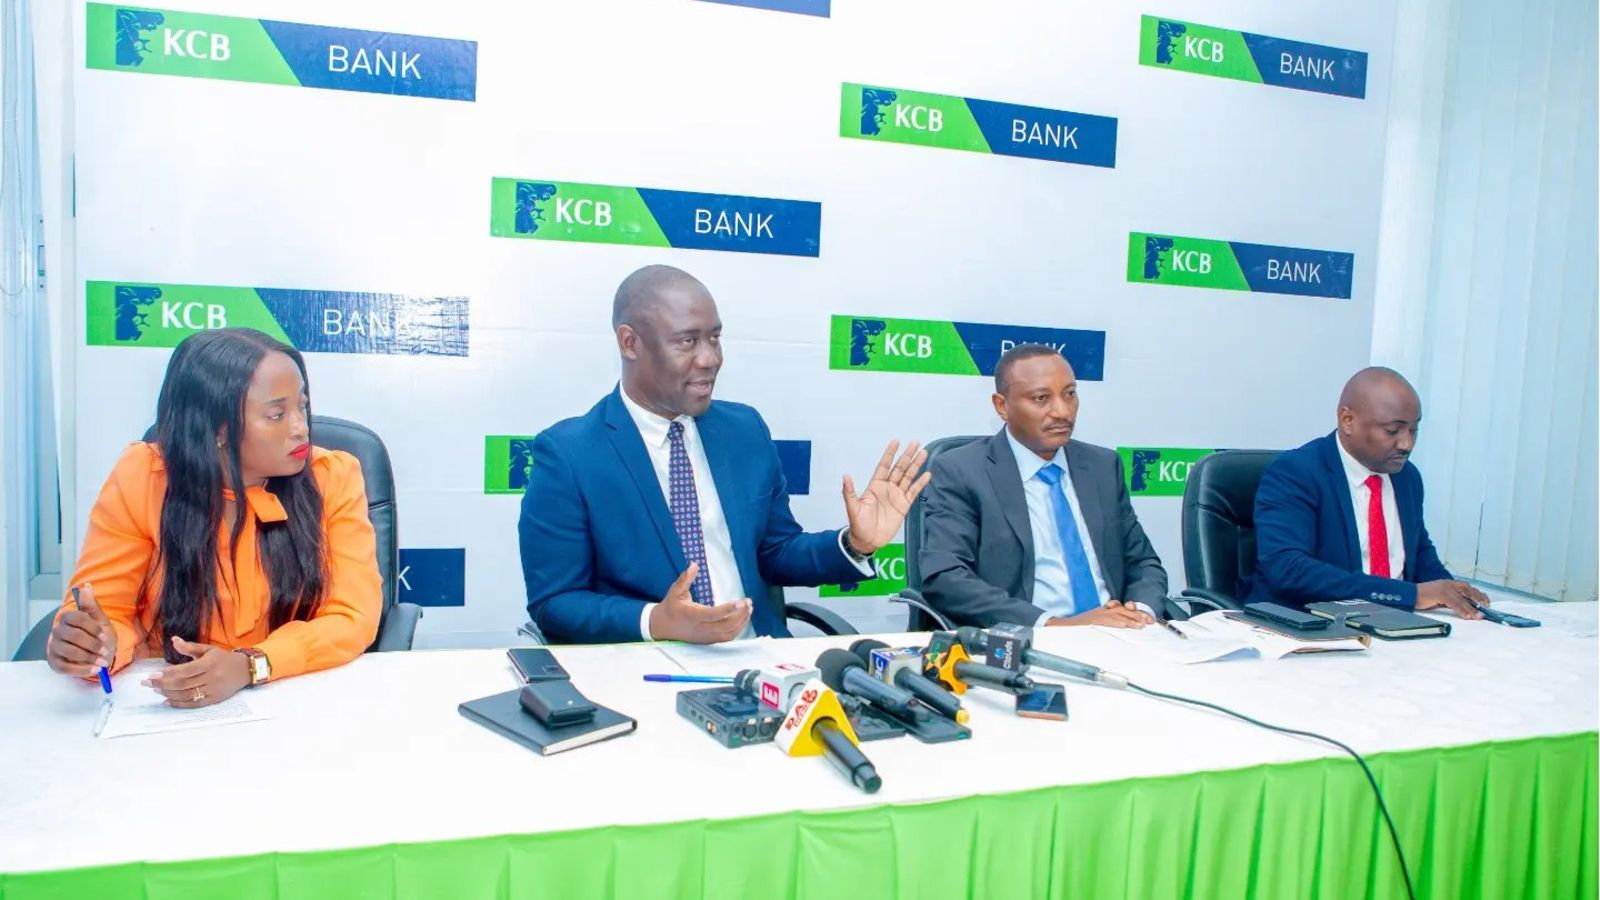 KCB Bank overtakes Equity as Kenya’s largest bank